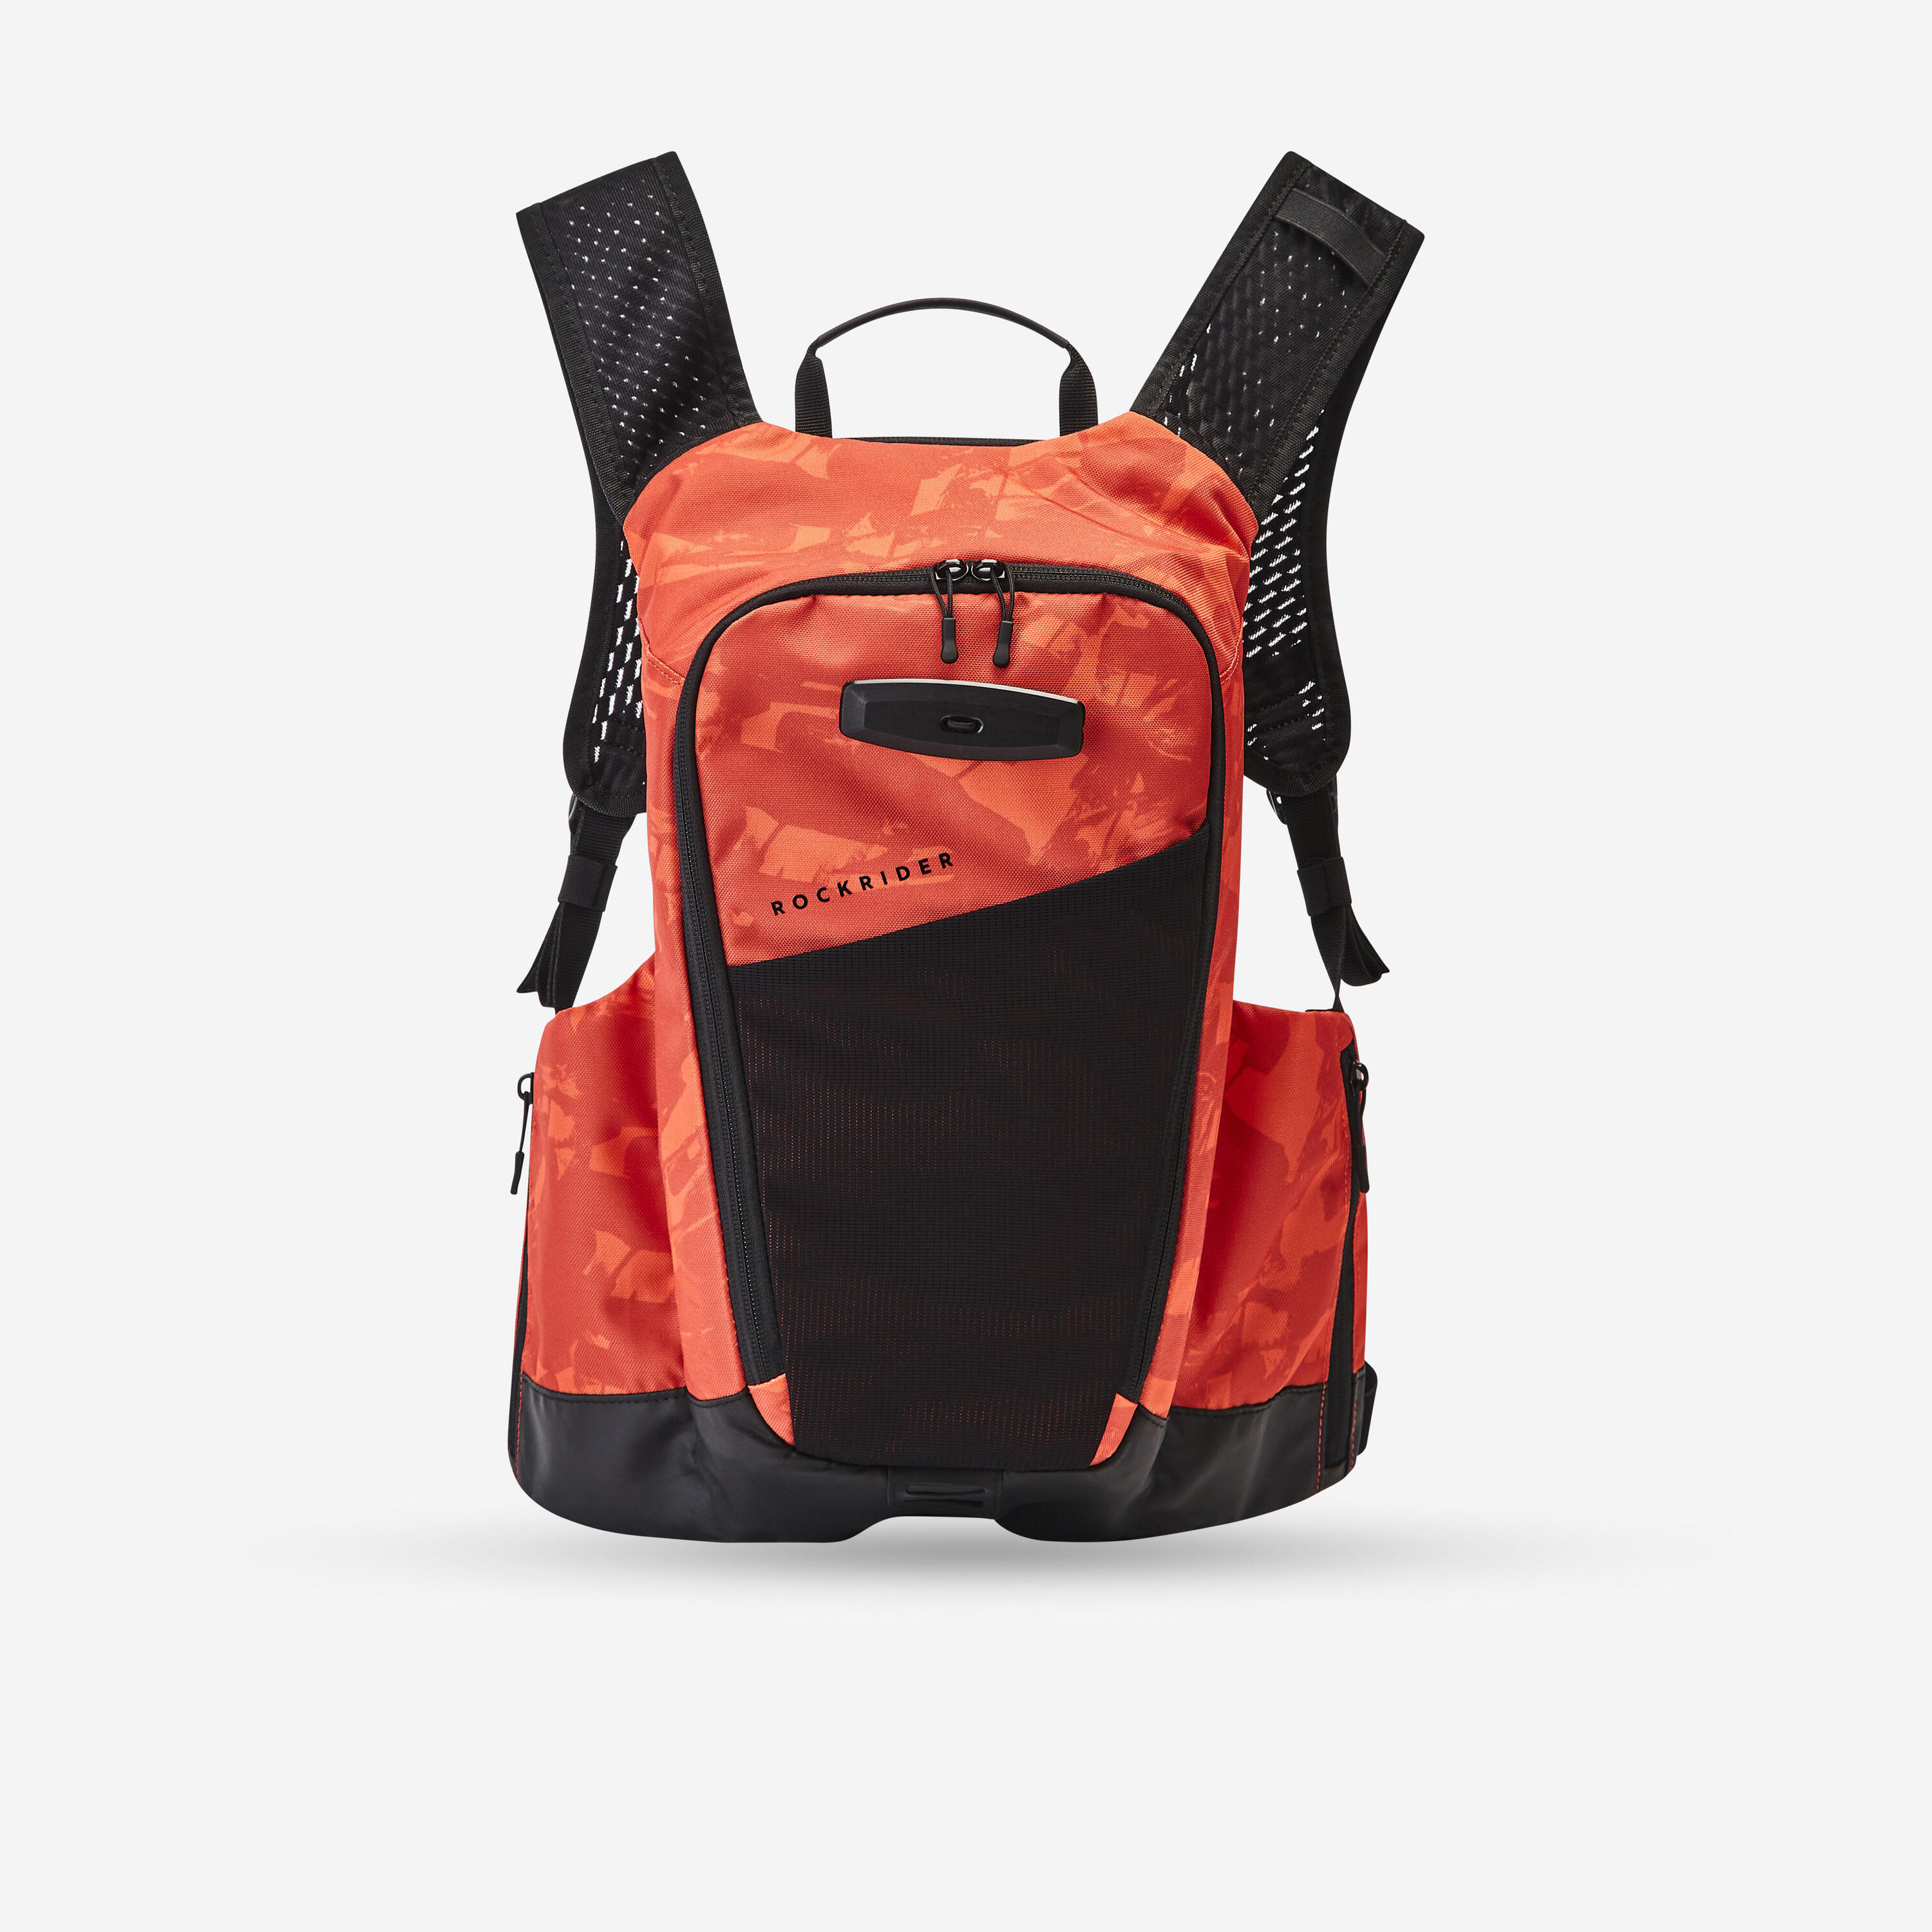 Mountain Bike Hydration Backpack Explore 7L/2L Water - Red 1/13